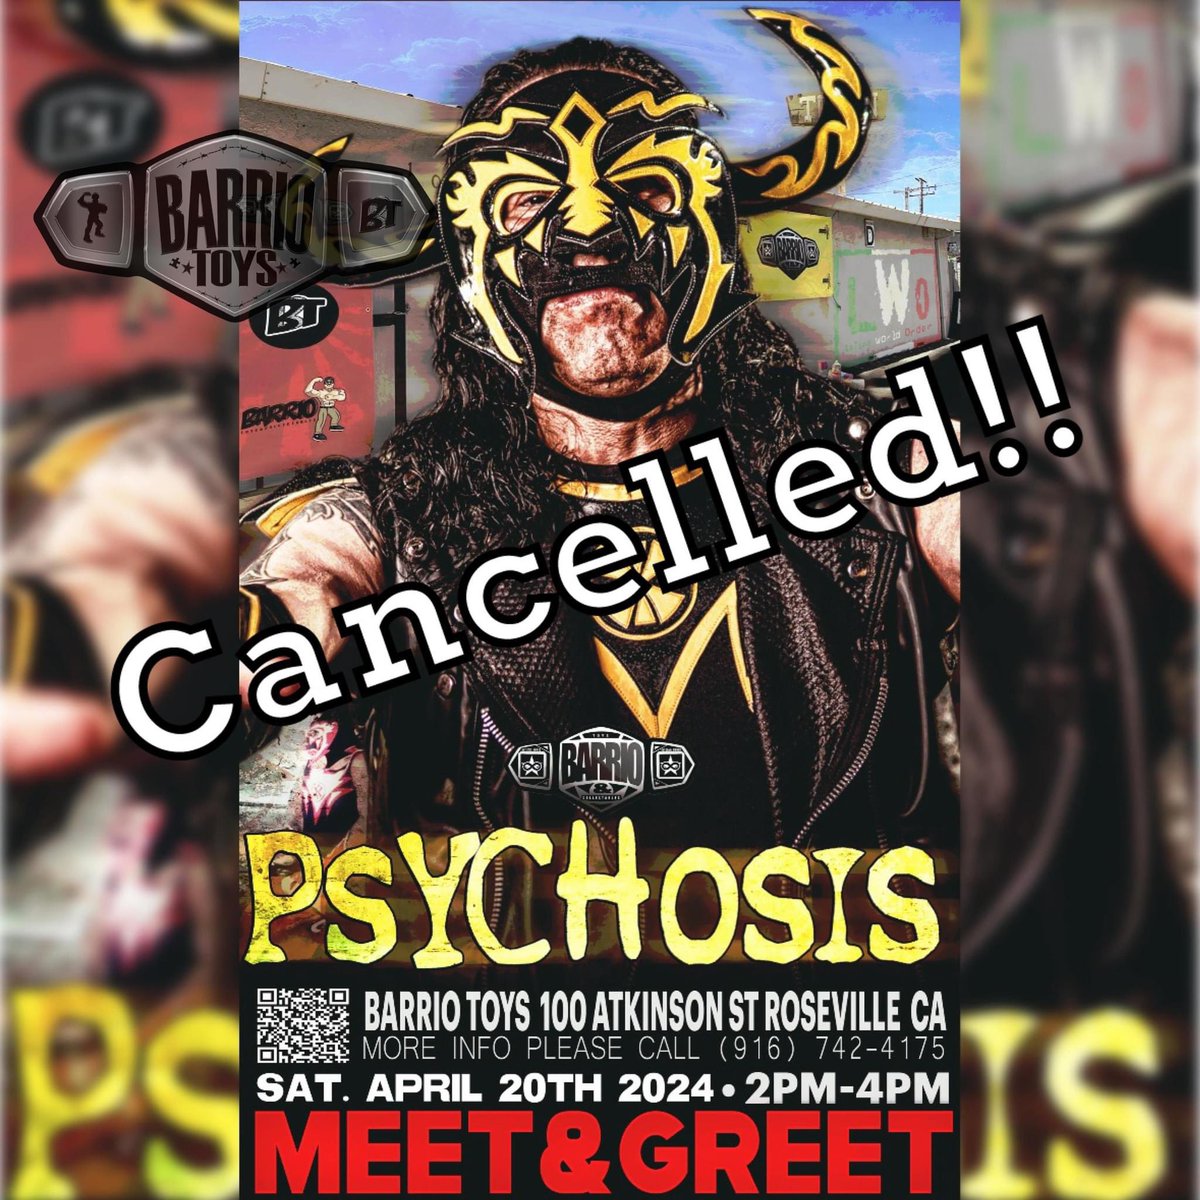 Wanted to let the public know, we (@BarrioToys) will not be having the meet and greet with @PsicosisOficial this Saturday in Roseville, per his health and doctors orders. We have been in constant contact with Nicho and also @maskedrepublic , his recovery time has been very slow.…